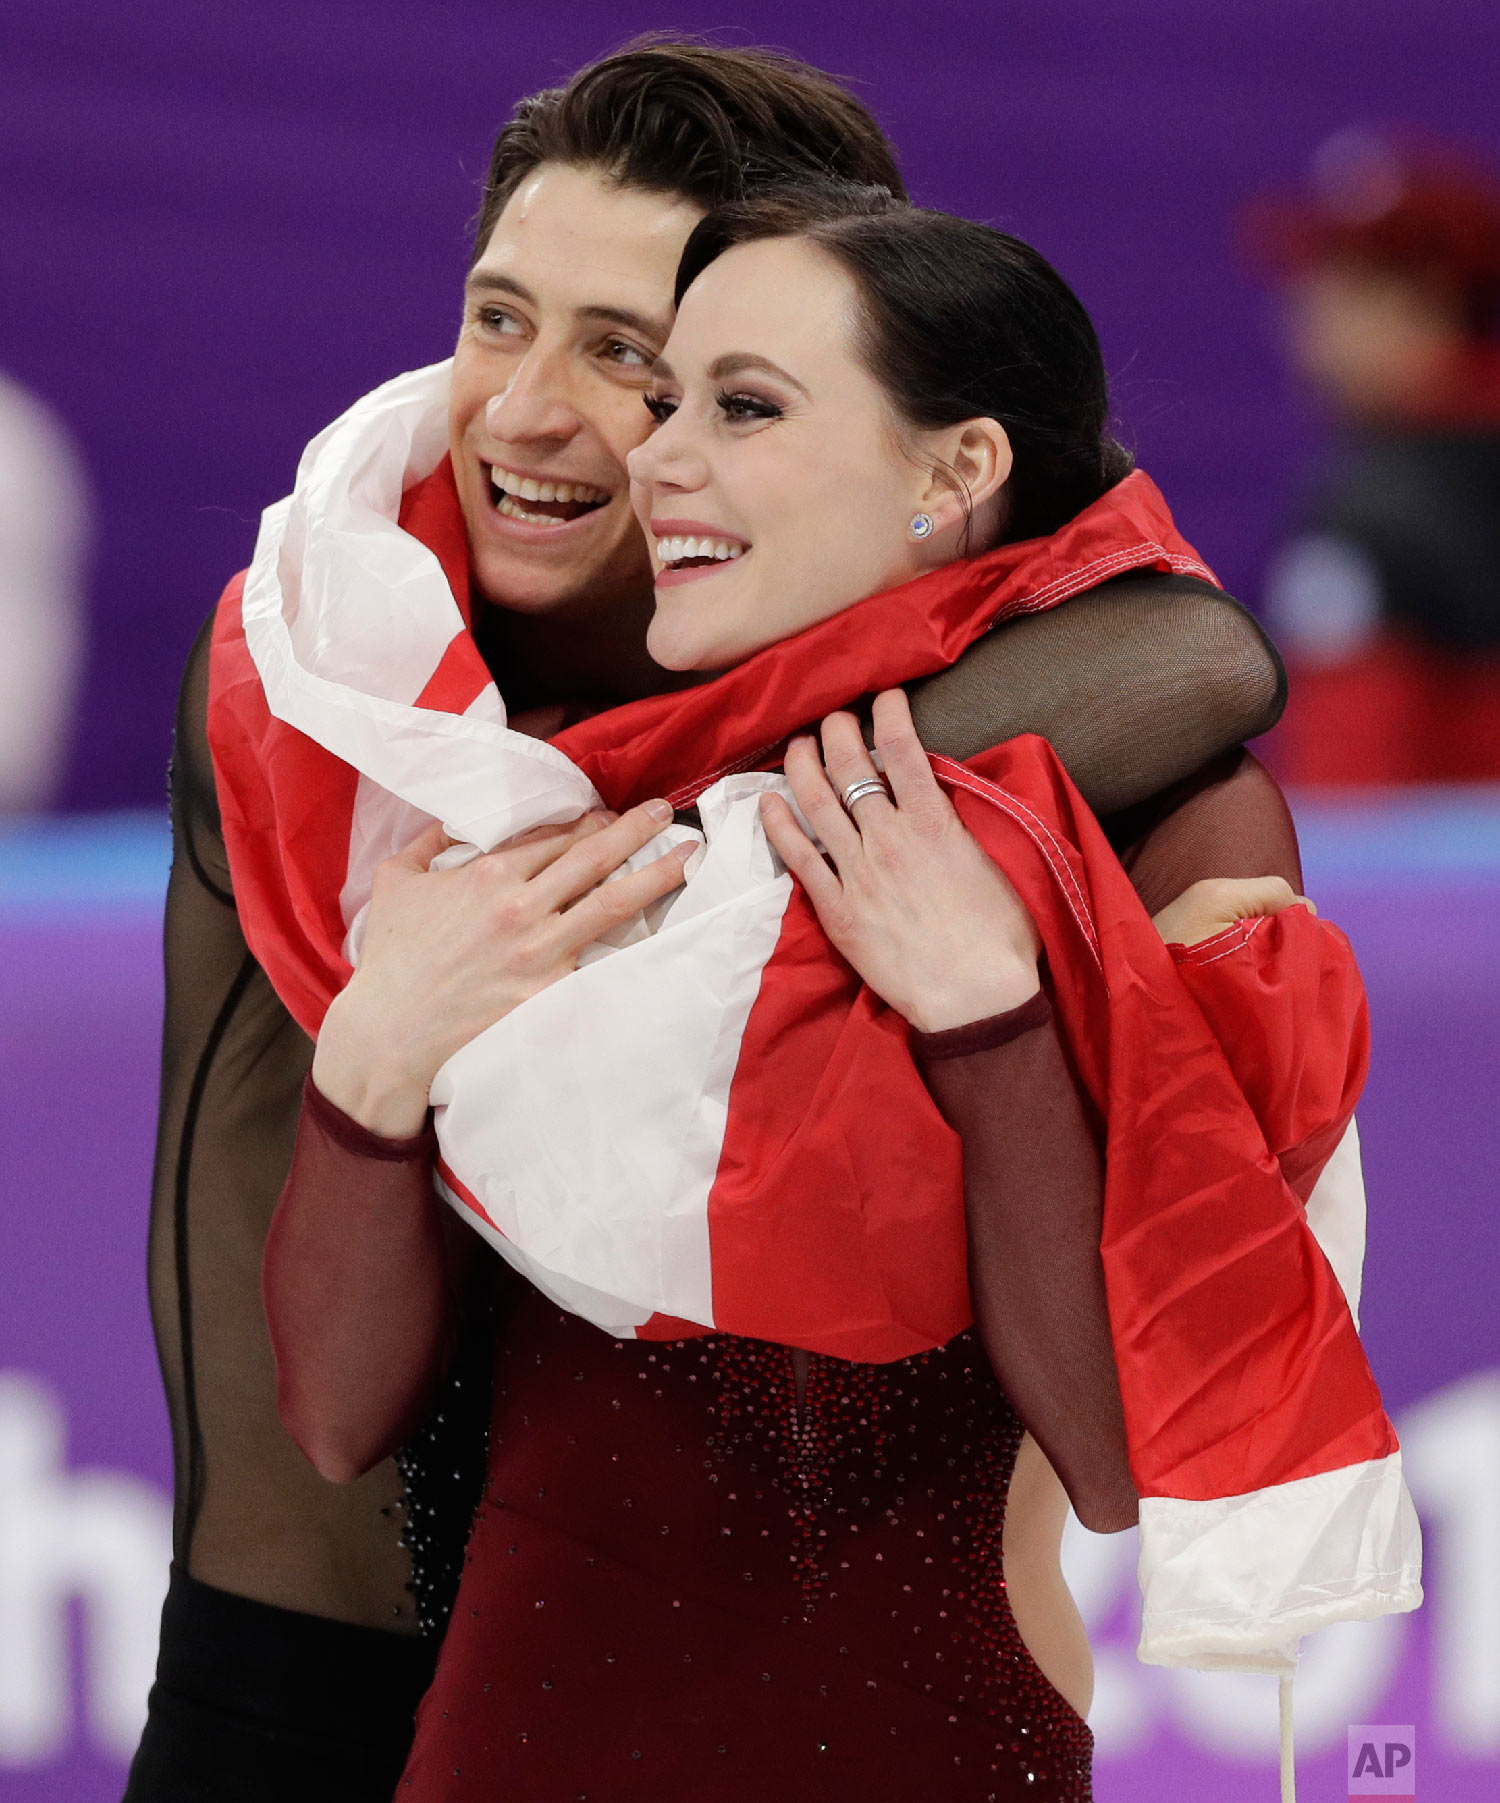  Tessa Virtue and Scott Moir of Canada celebrate during the venue ceremony after winning the gold medal in the ice dance, free dance figure skating final at the 2018 Winter Olympics in Gangneung, South Korea, on Feb. 20, 2018. (AP Photo/David J. Phil